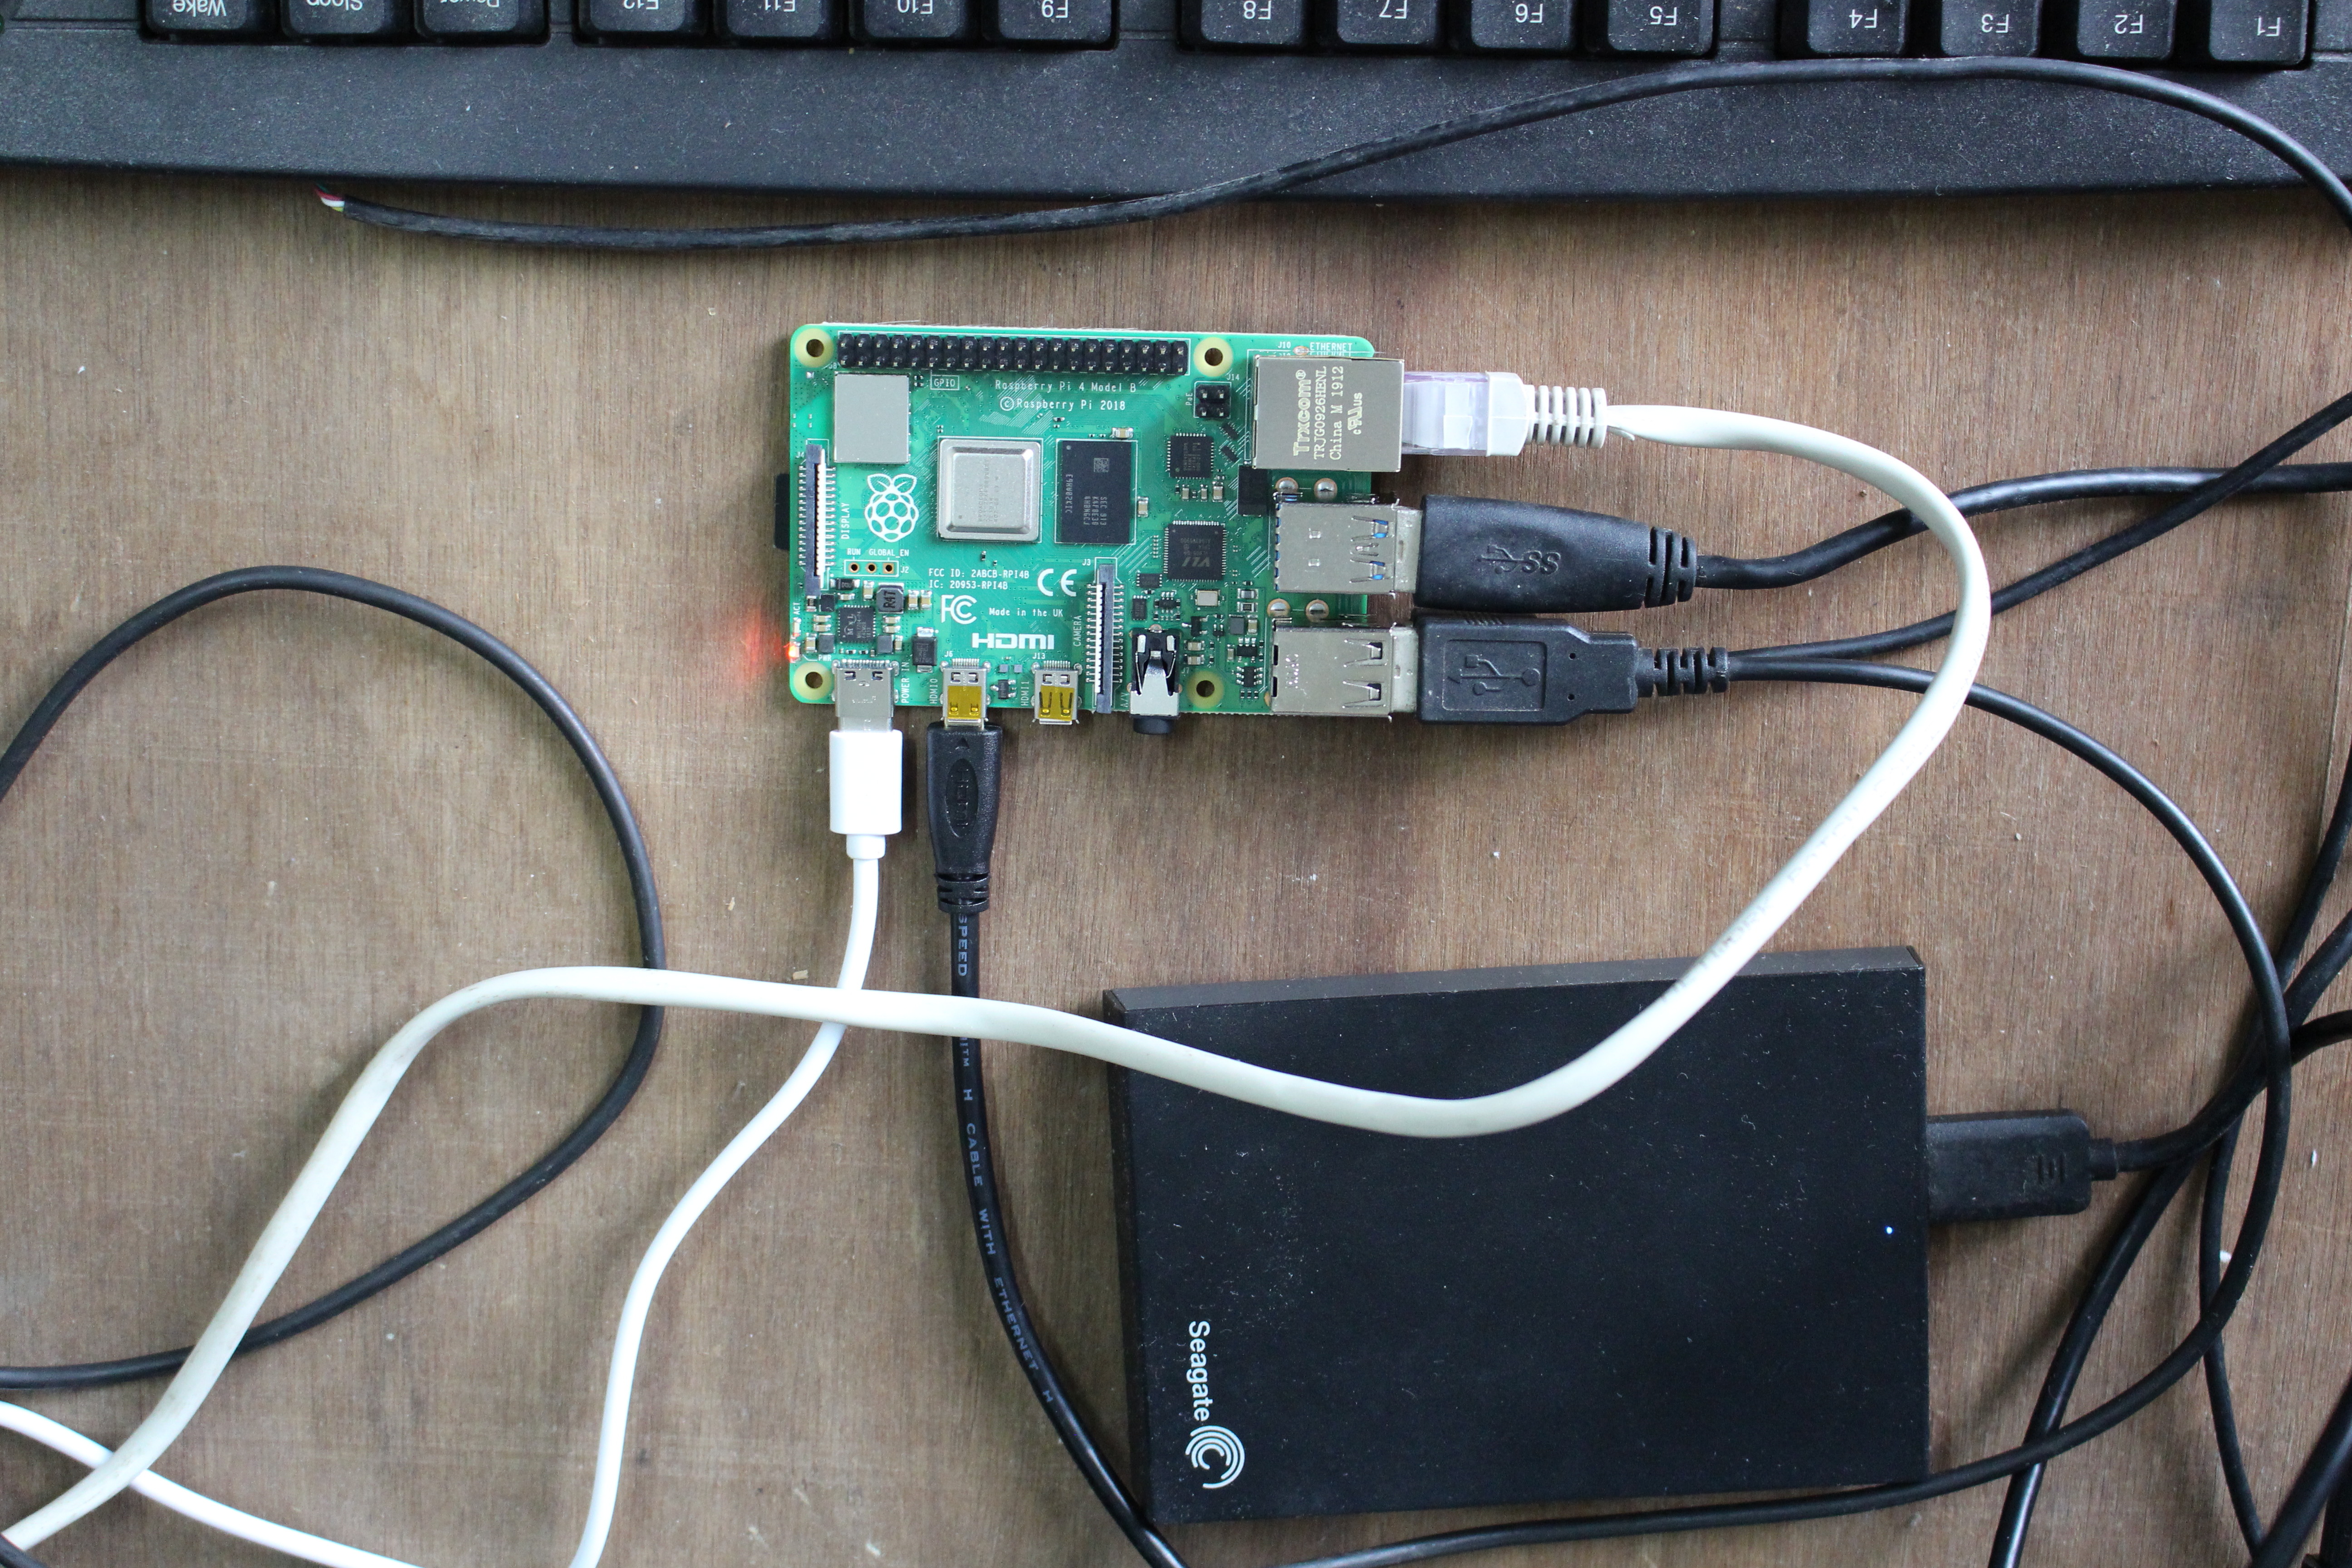 This almost-great Raspberry Pi alternative is missing one key feature